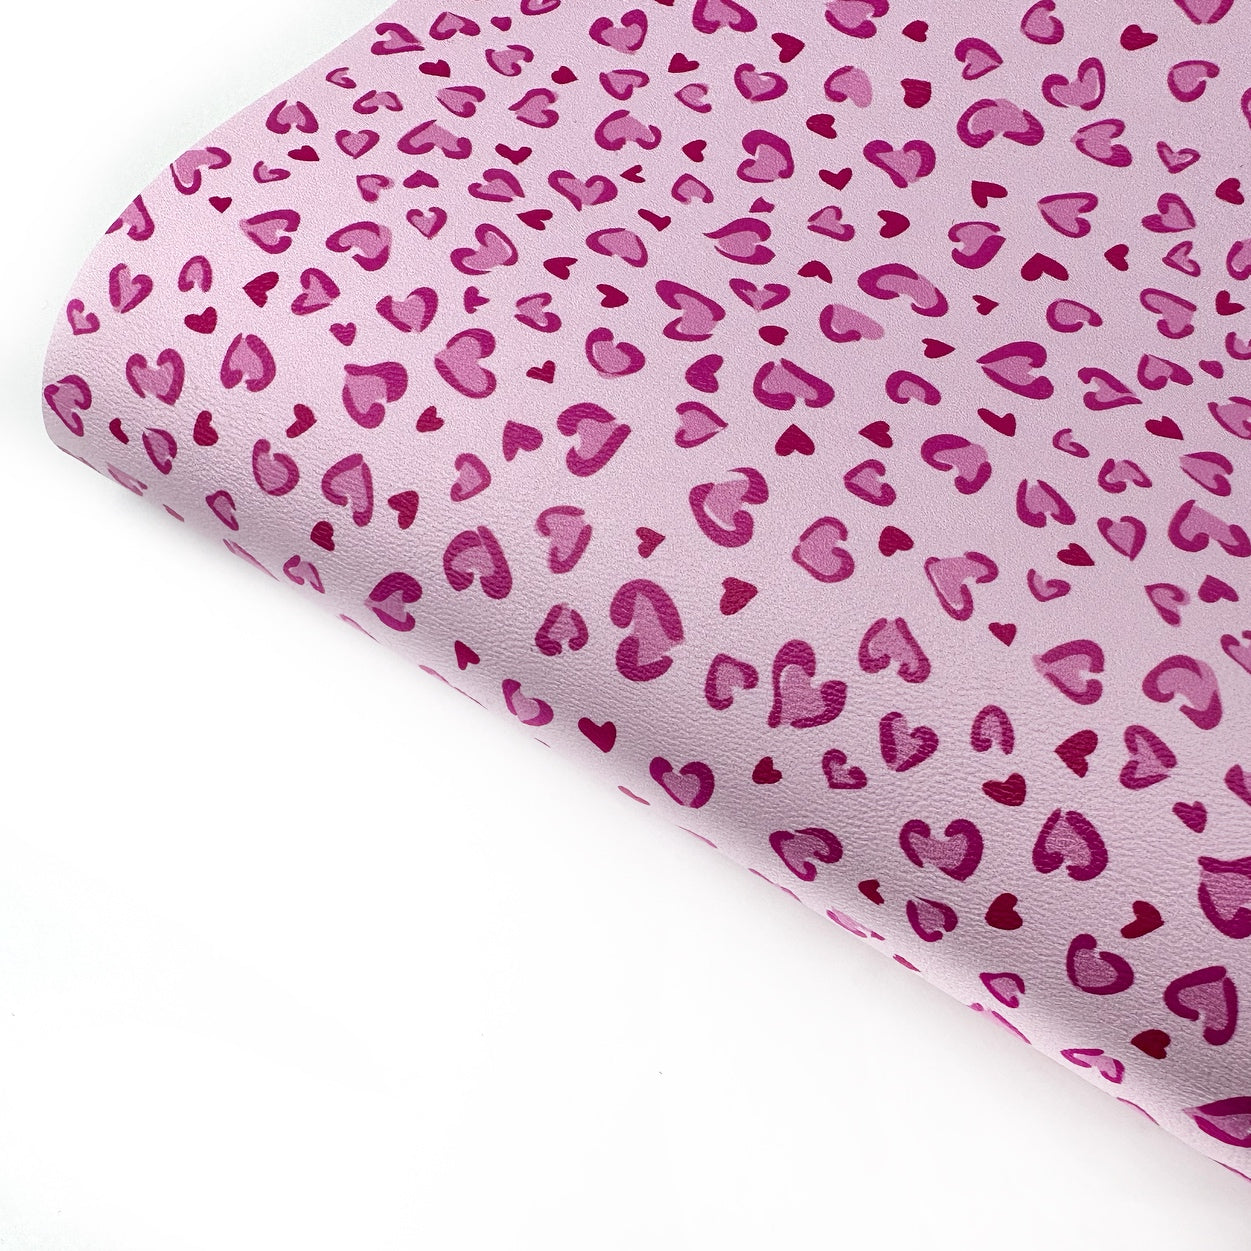 Pink Leopard Heart Print Premium Faux Leather Fabric Sheets